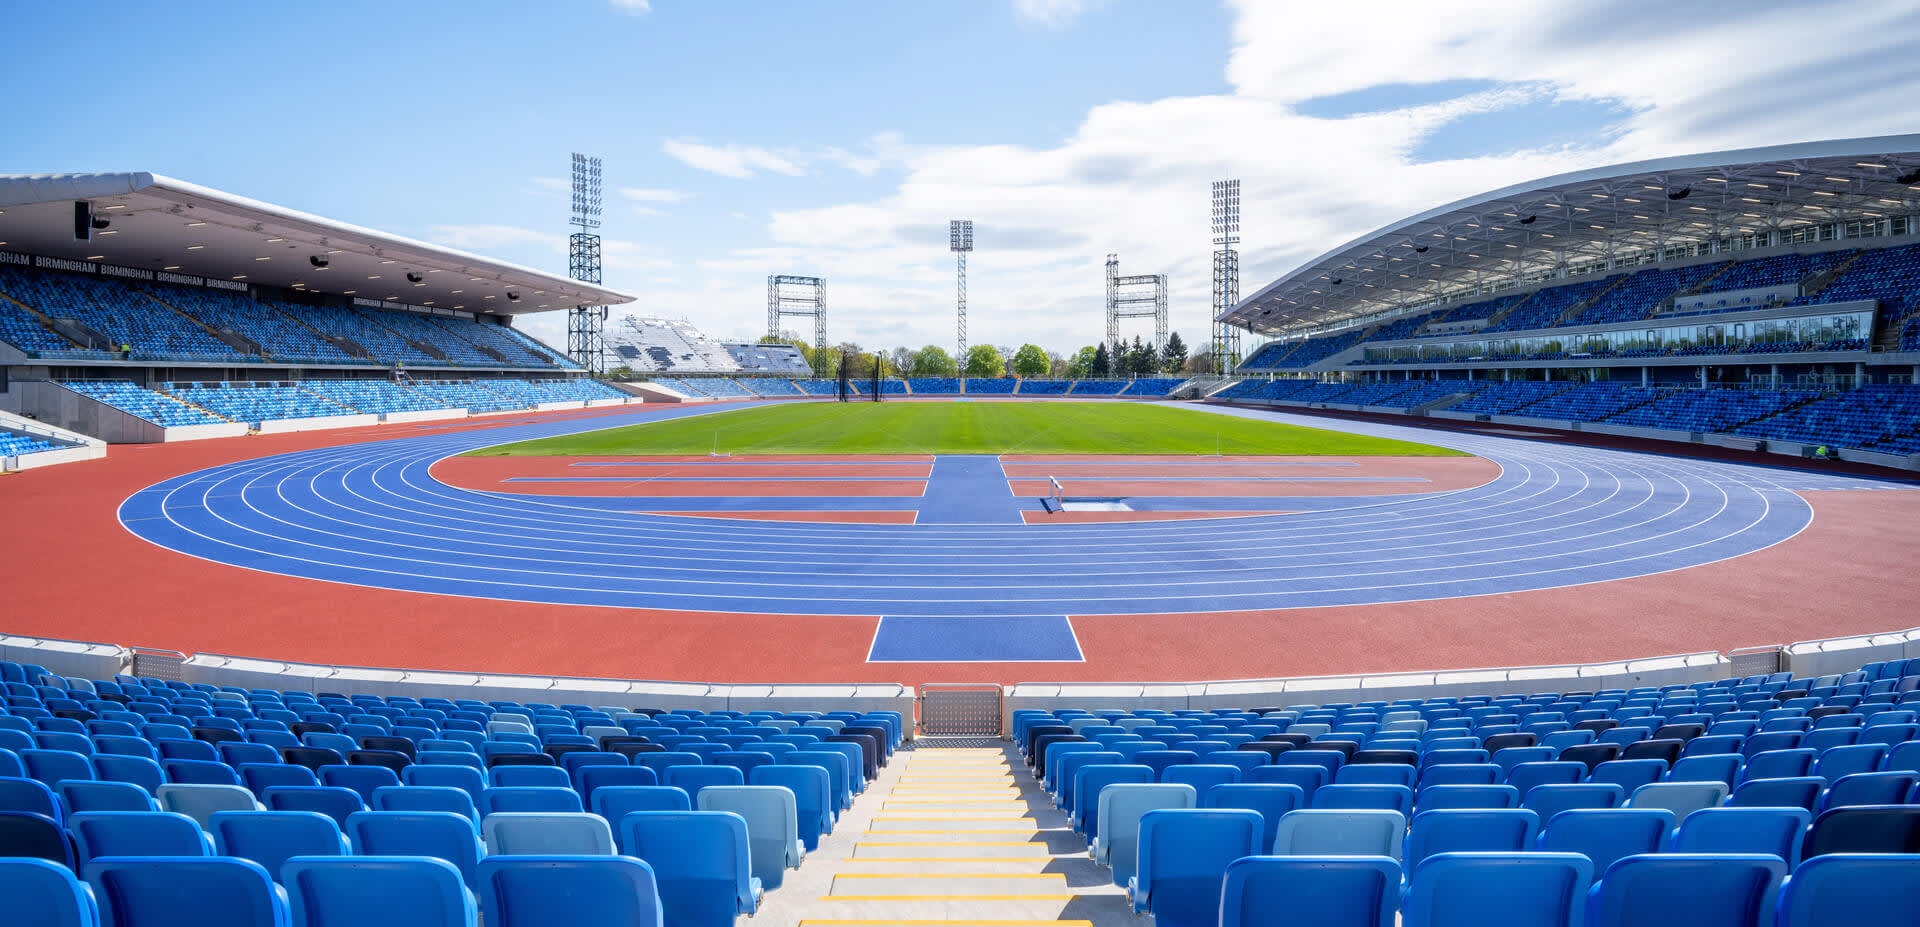 An expansive view of a large sport stadium with a running track in it.